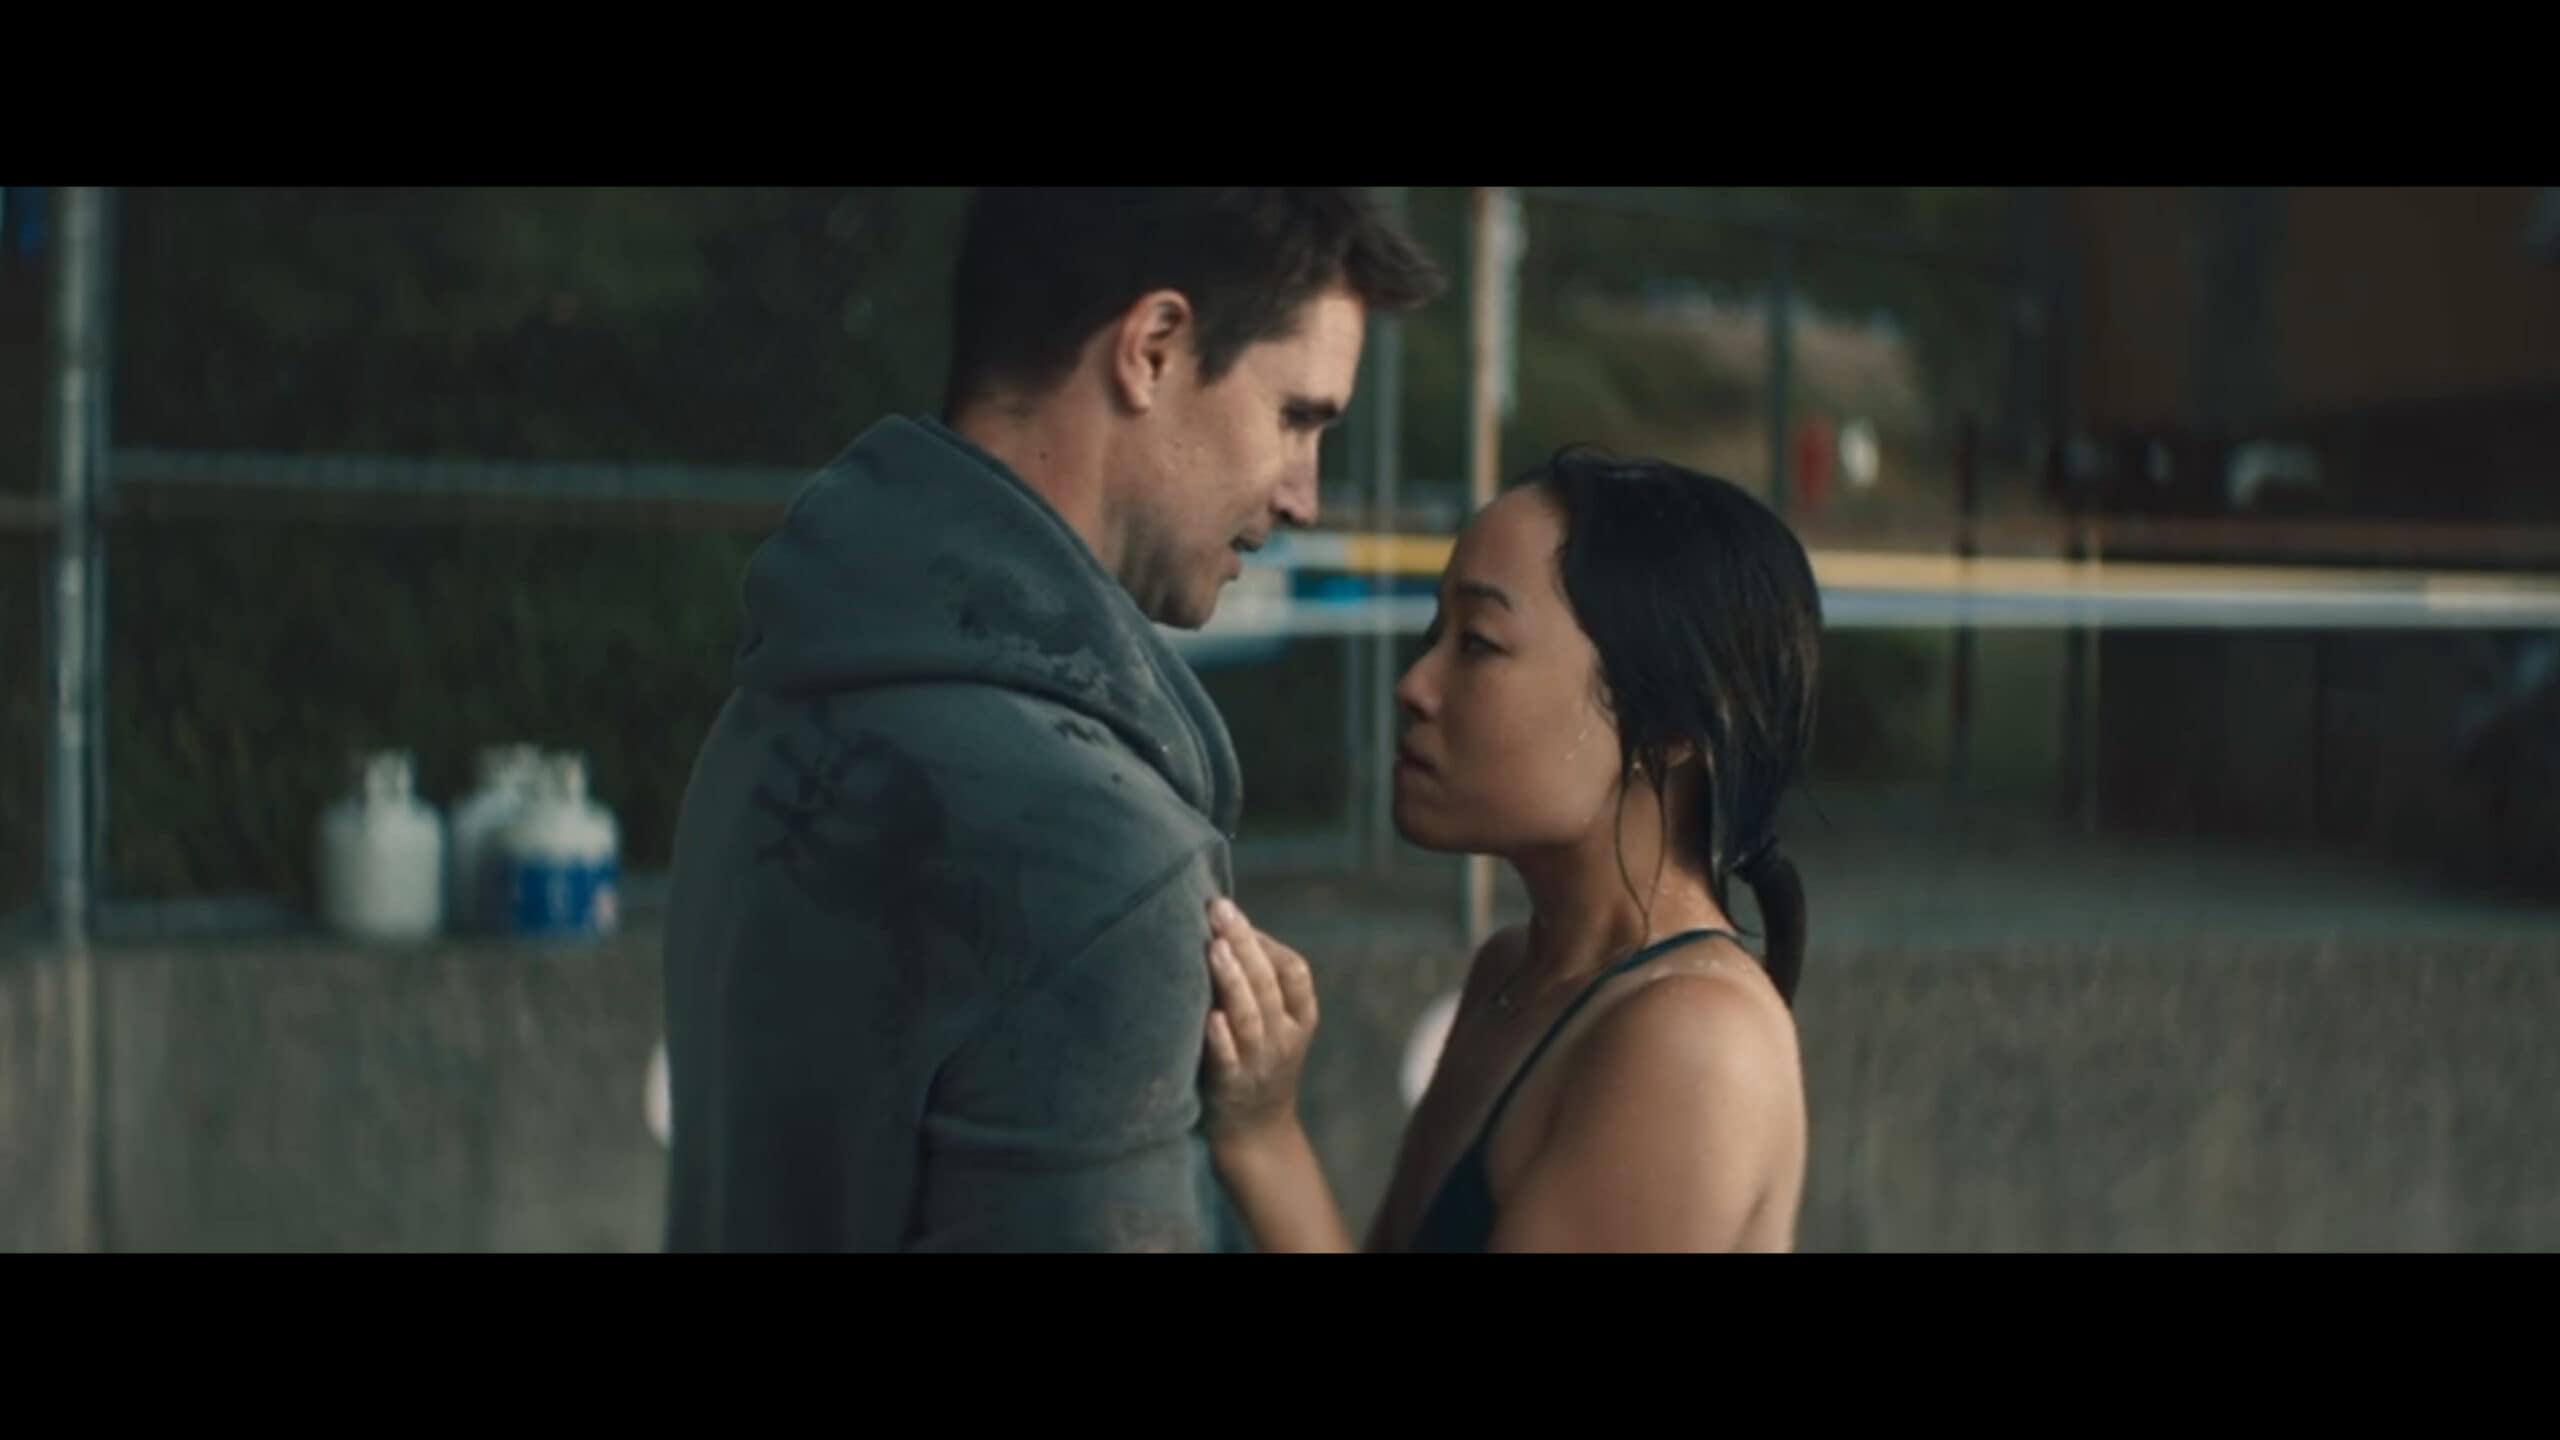 Blake (Robbie Amell) and Waverly (Andrea Bang) having a moment after a swimming lesson